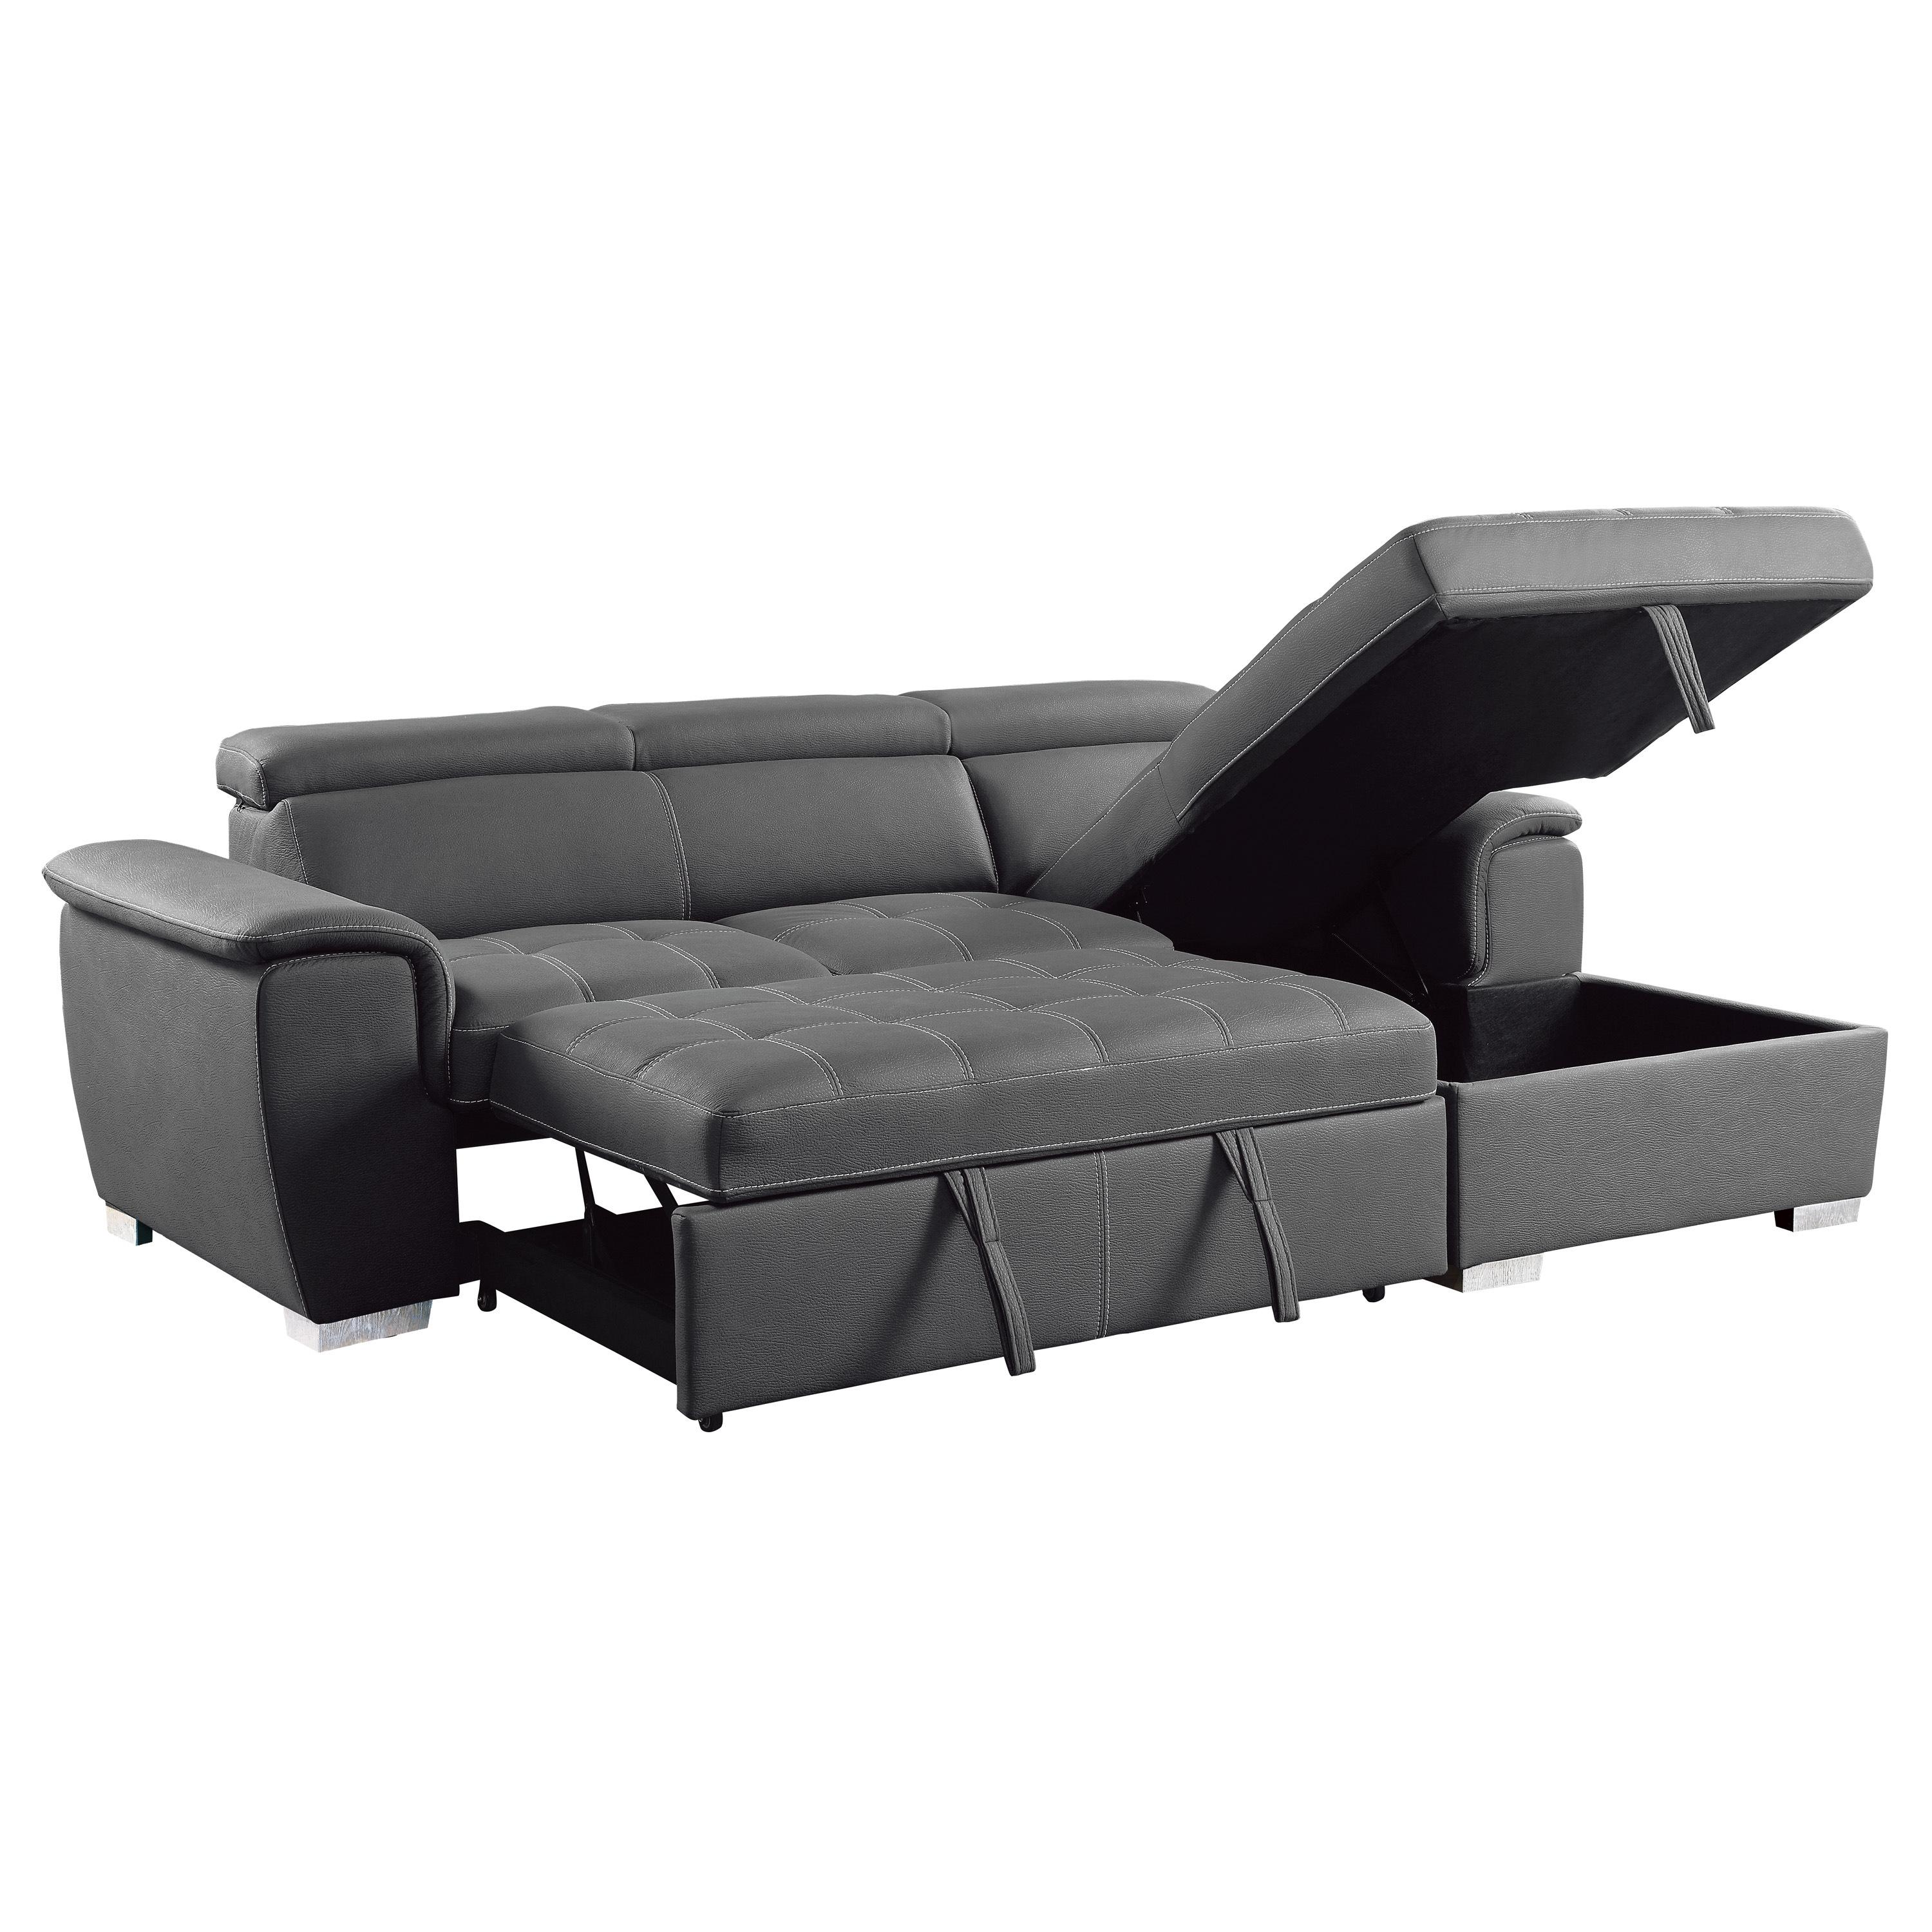 

    
Homelegance 8228GY* Ferriday Sectional Gray 8228GY*
